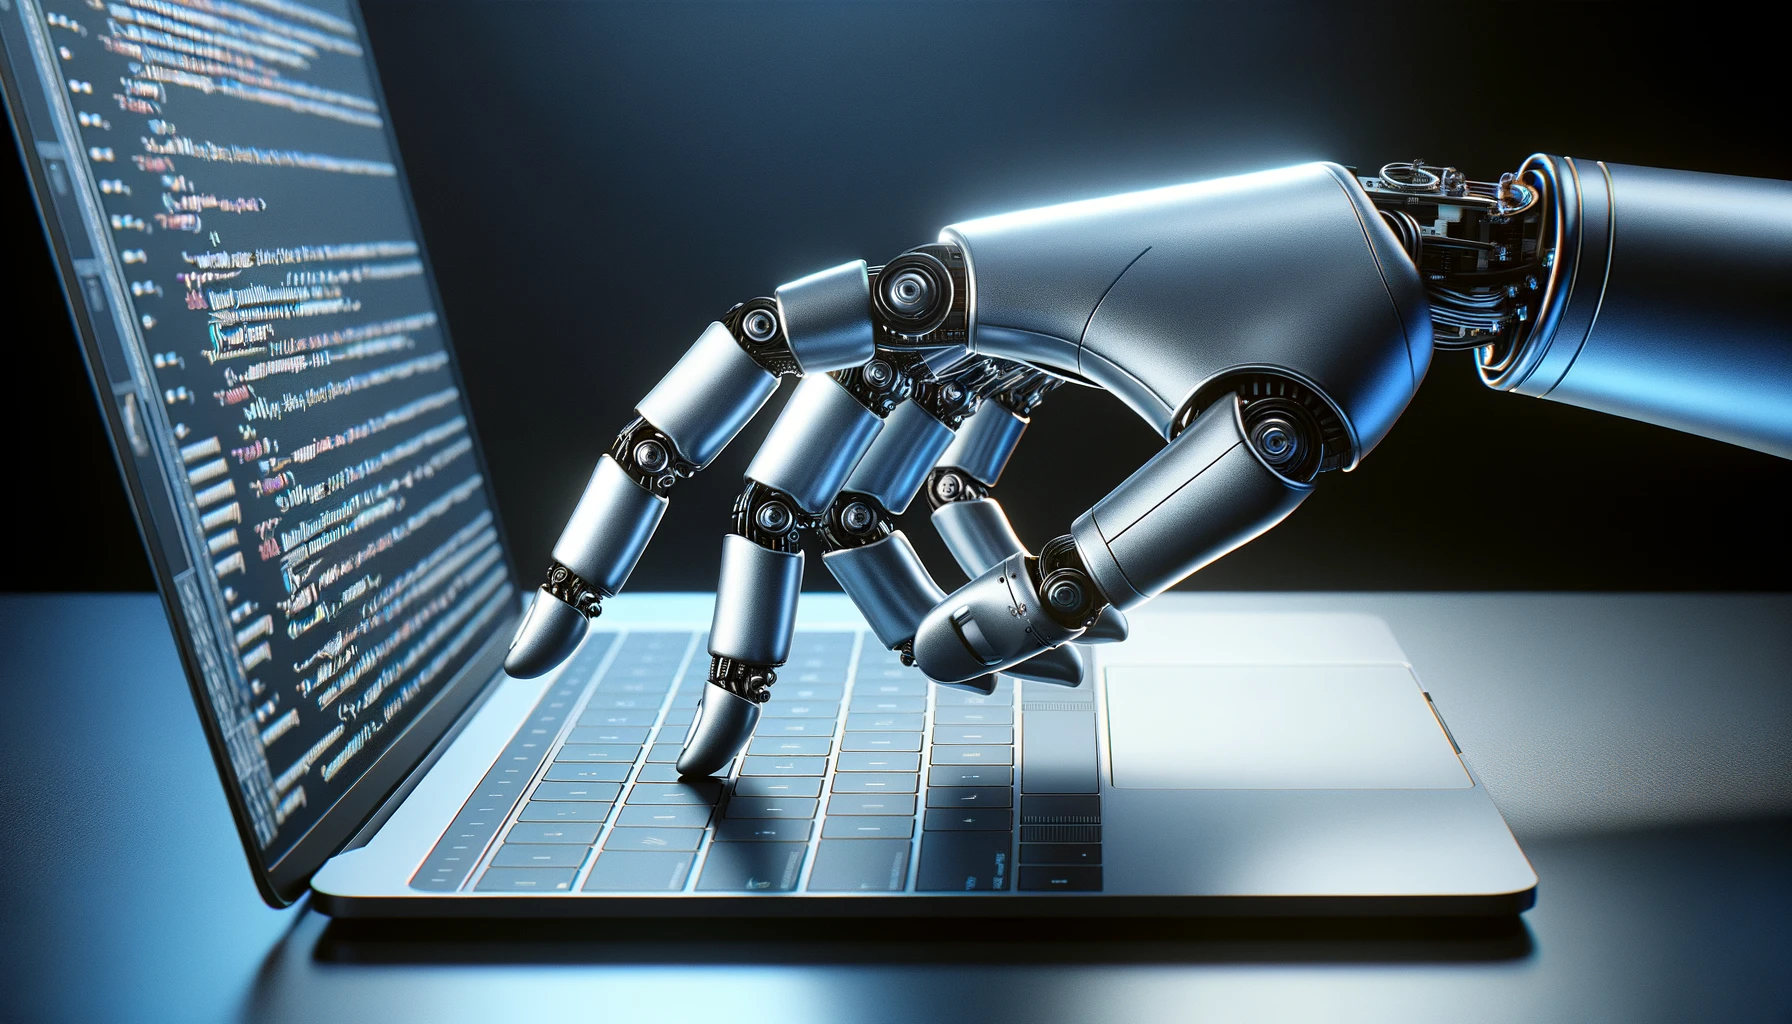 A widescreen image of a robot hand, with a metallic, sleek design, extending one finger to press a key on a laptop keyboard. The laptop is modern